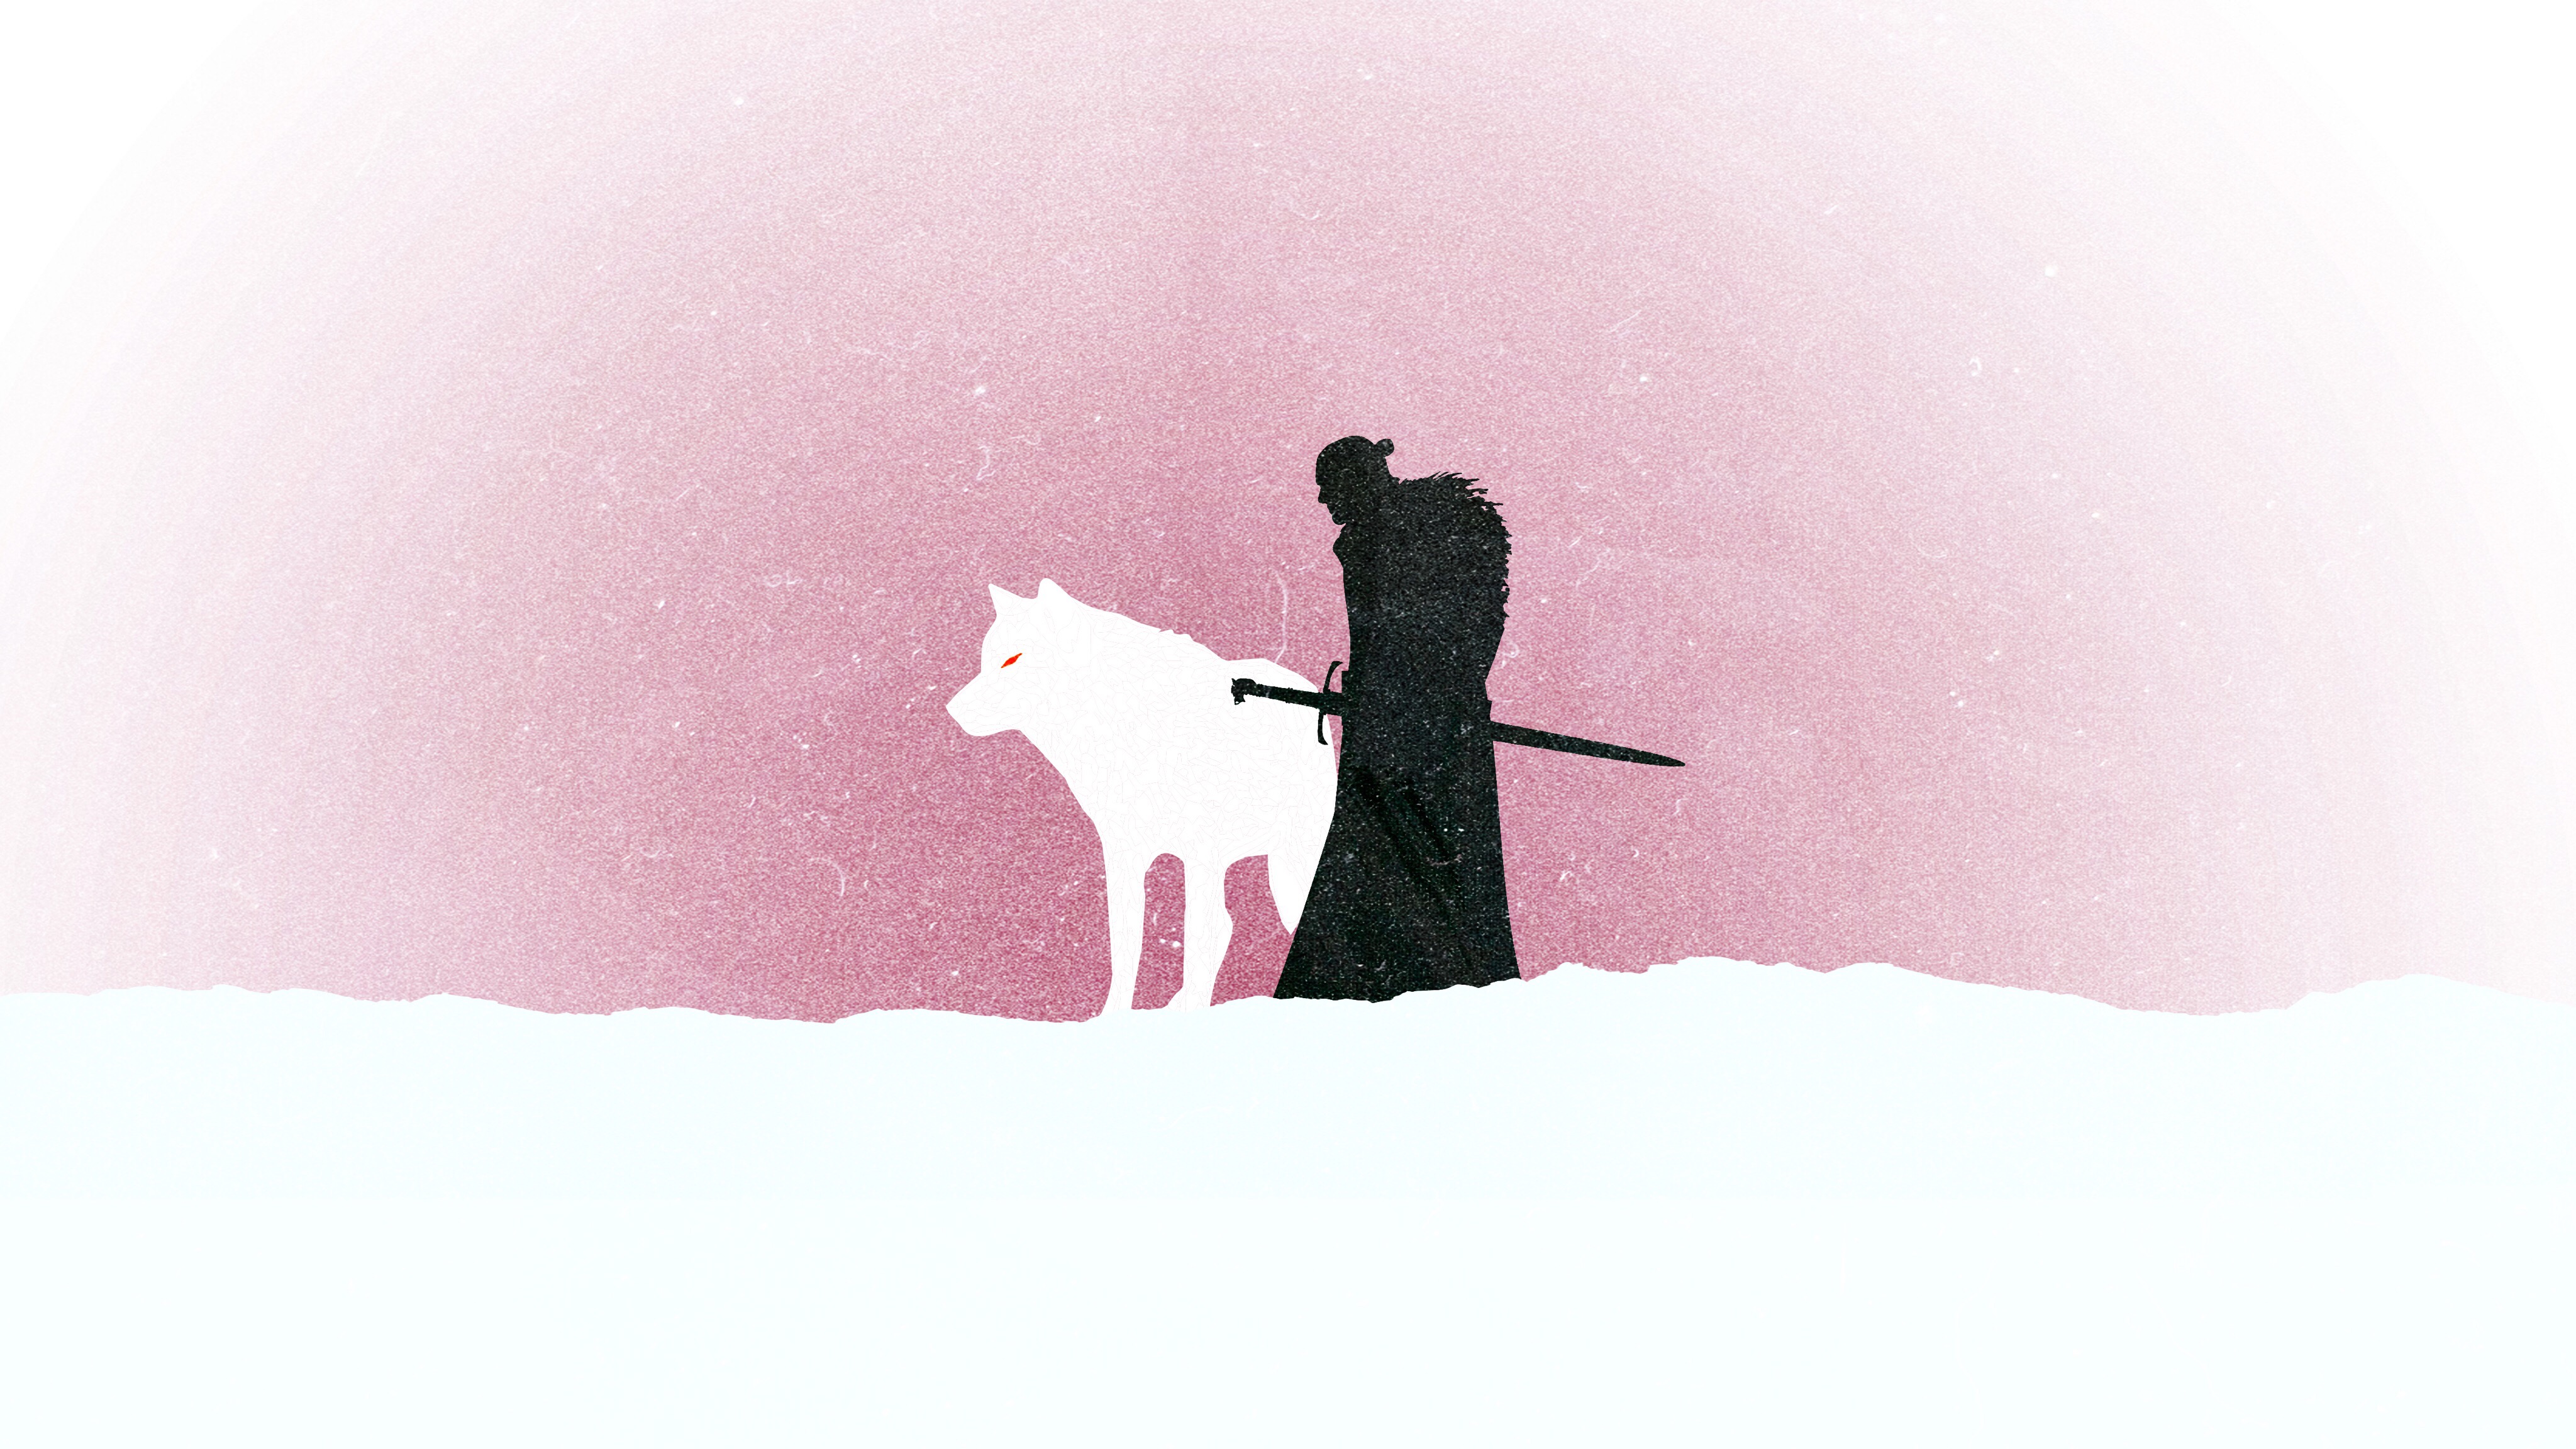 Jon Snow, Game of Thrones, A Song of Ice and Fire Wallpaper